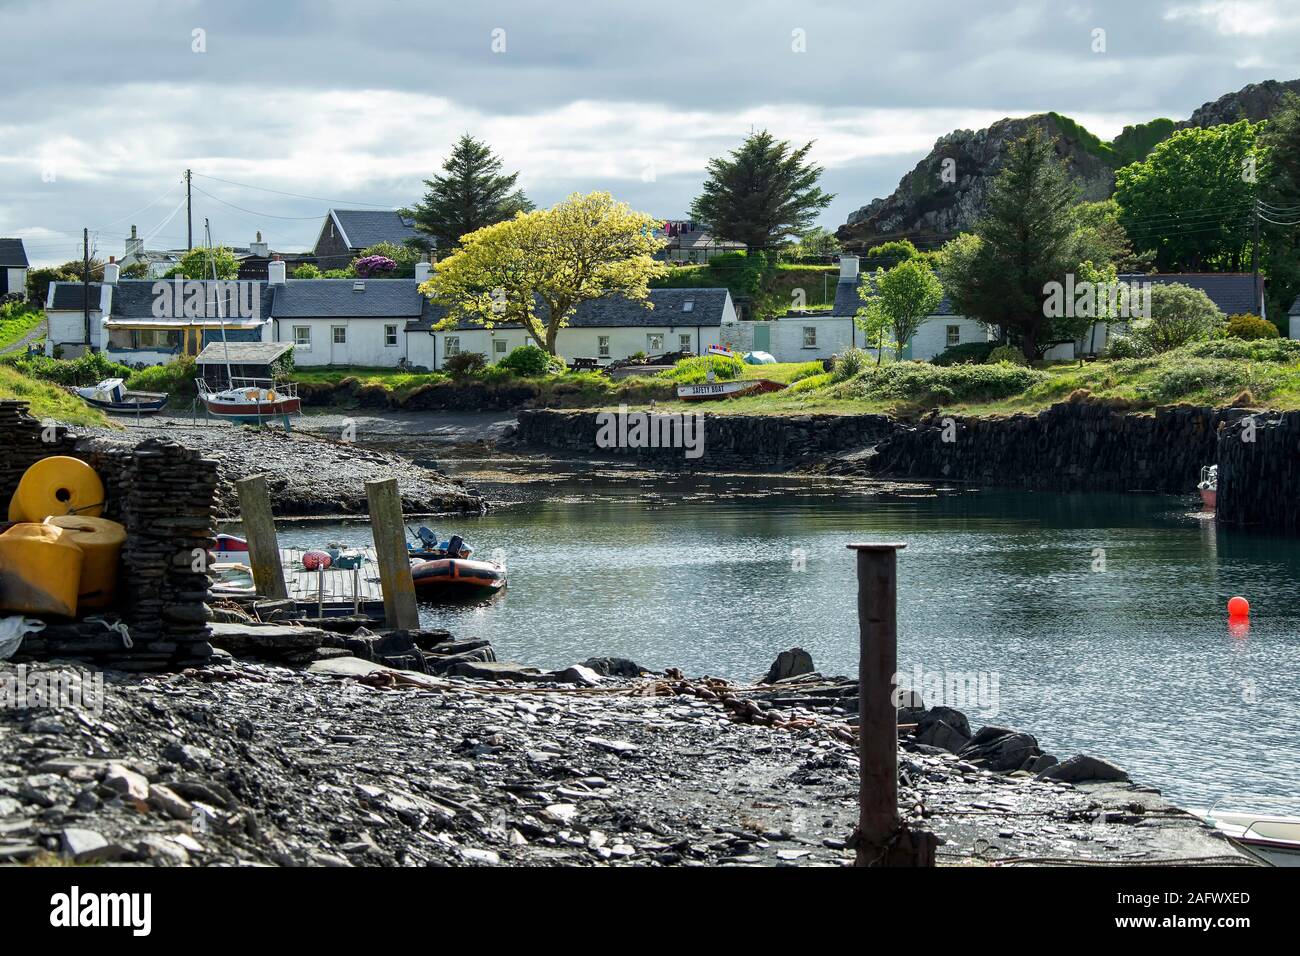 The harbour on Easdale Island off the West Coast of Scotland showing Slate Workers' Cottages with rugged hills behind. Stock Photo